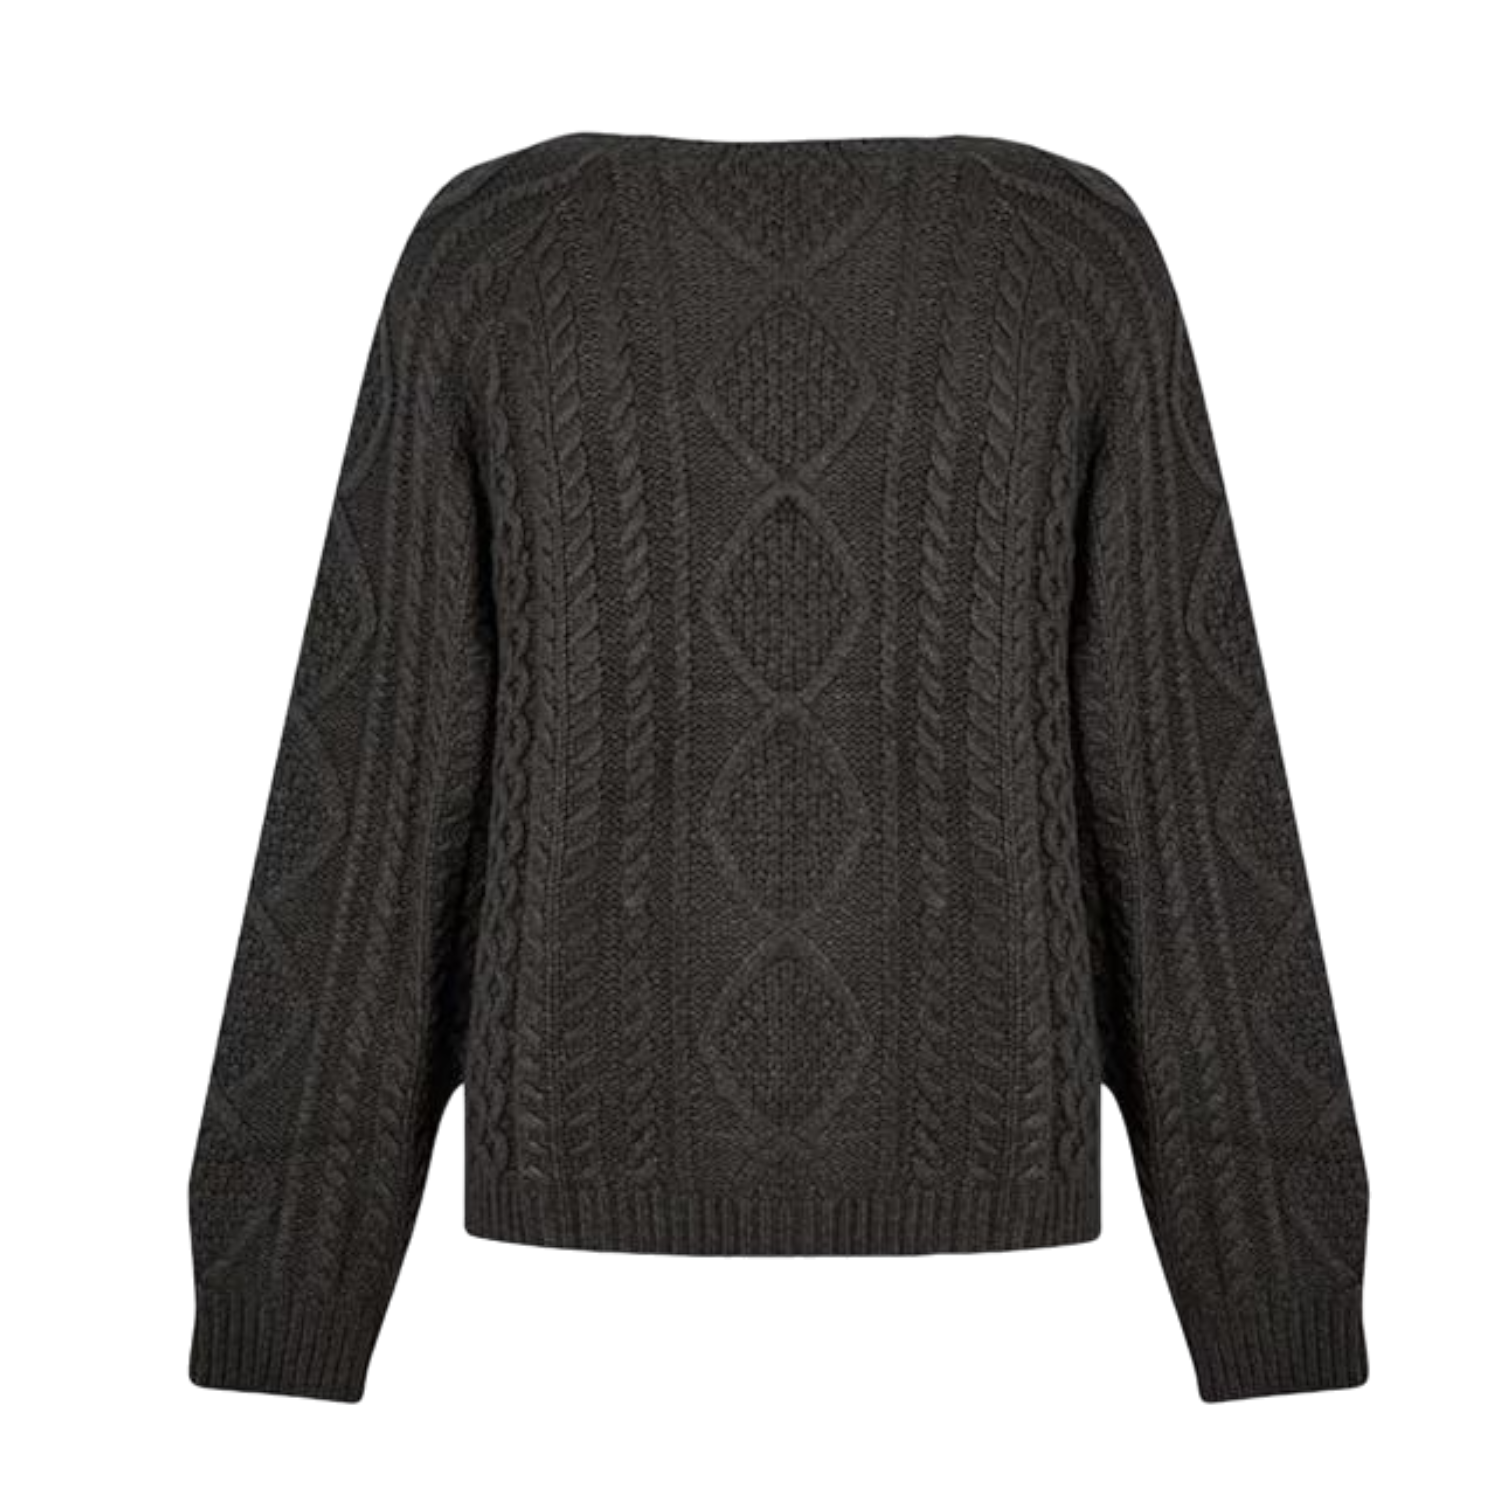 LUXURY HUB FEAR OF GOD ESSENTIALS CABLE KNIT JUMPER